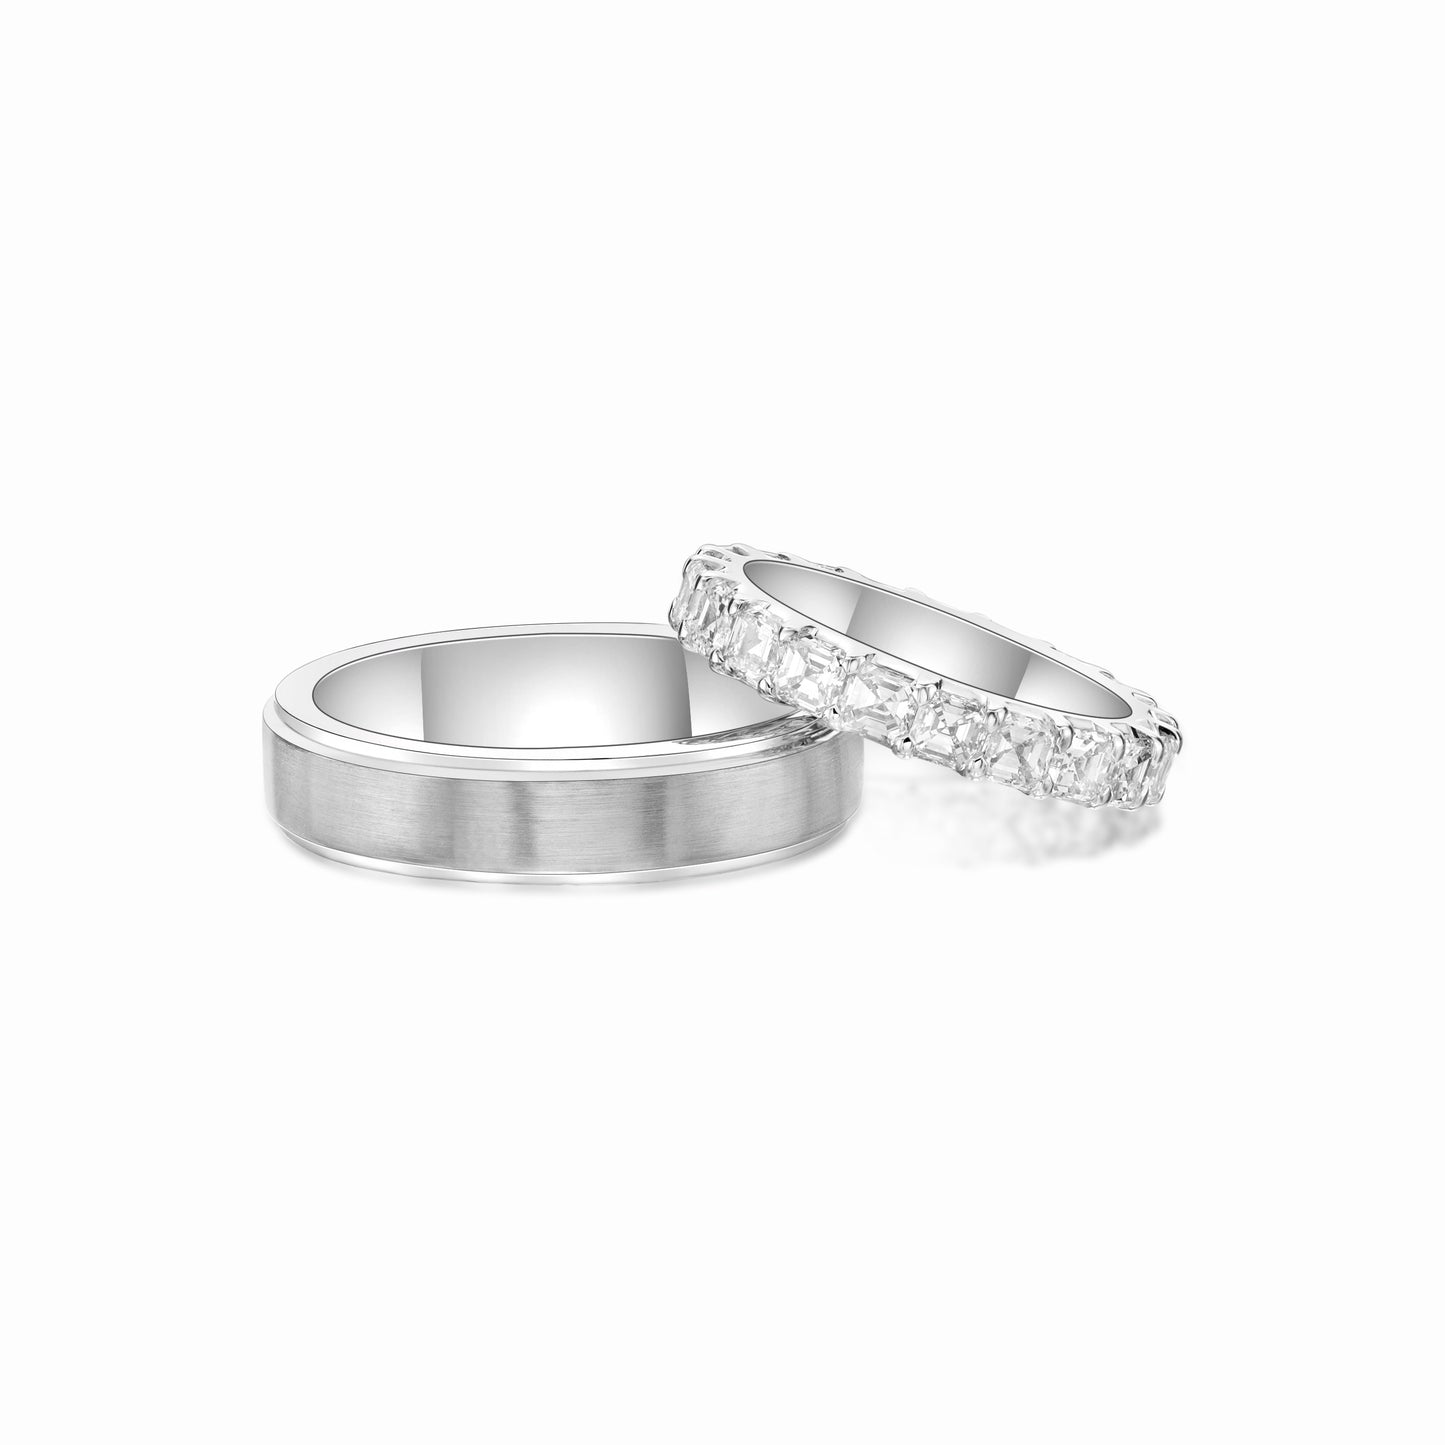 Men's Wedding Band- 18K White Gold 5mm band with raised inner strip in satin finish with polished edges